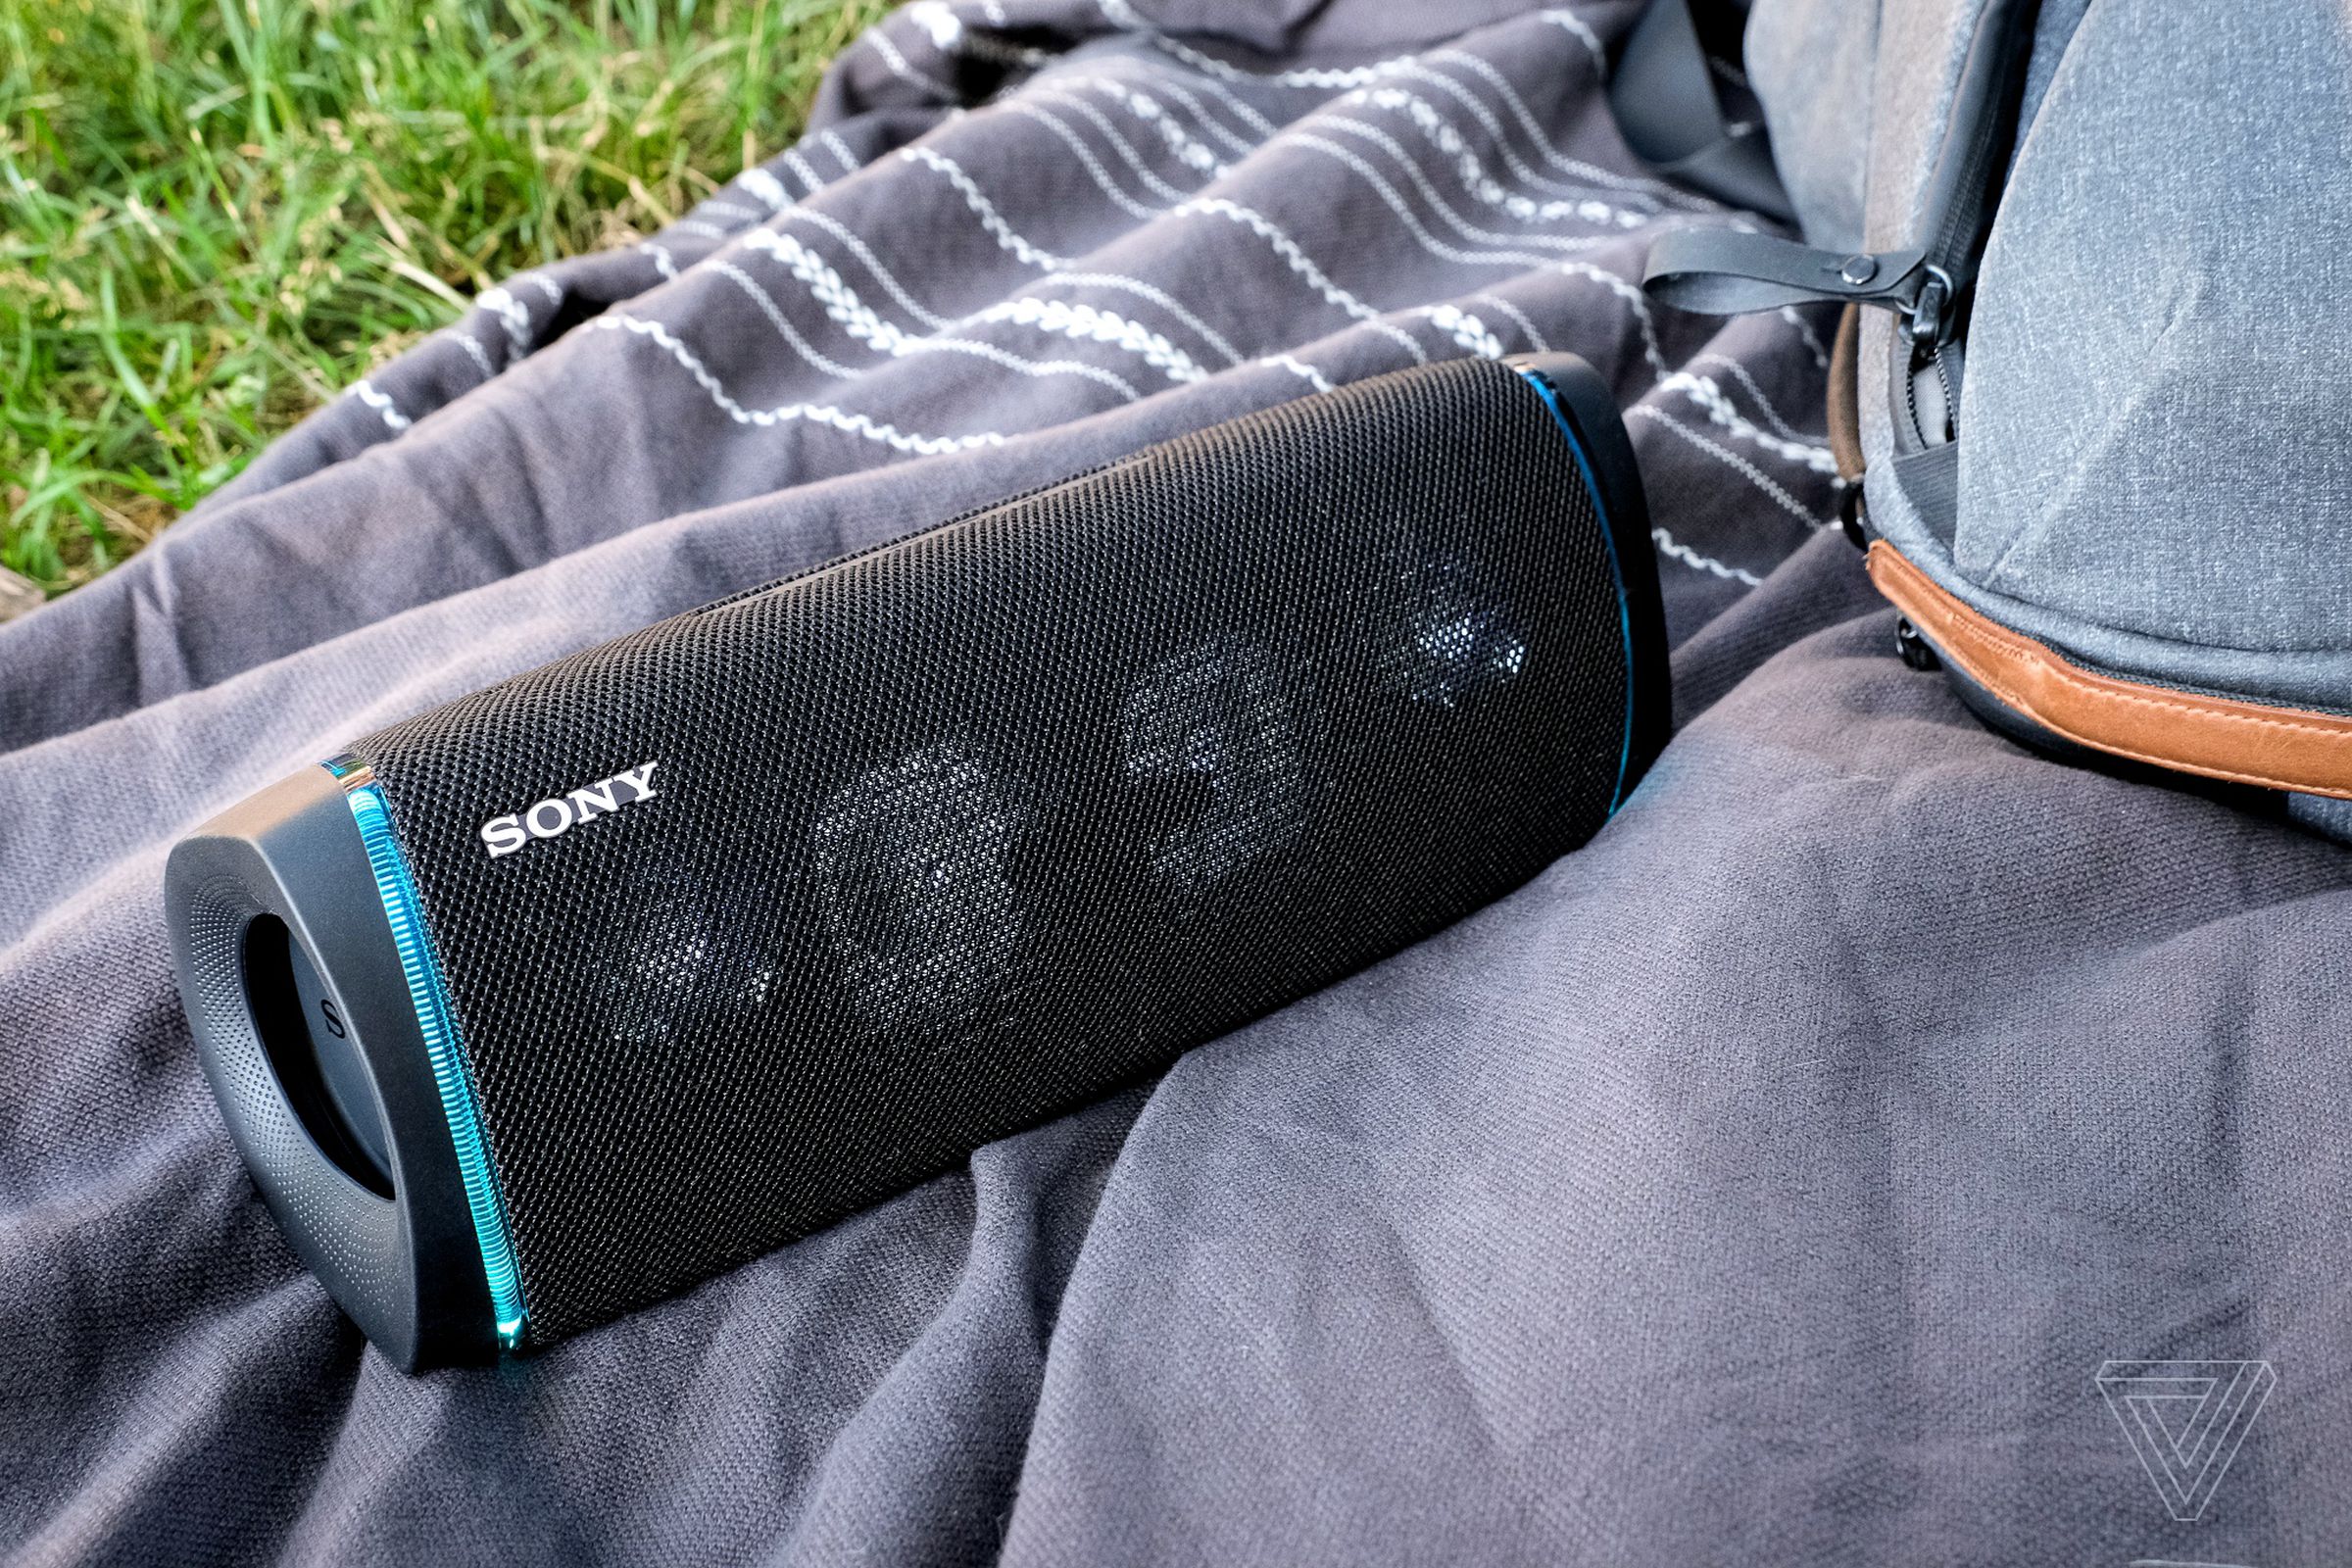 Our favorite Sony Bluetooth speaker is nearly half off today